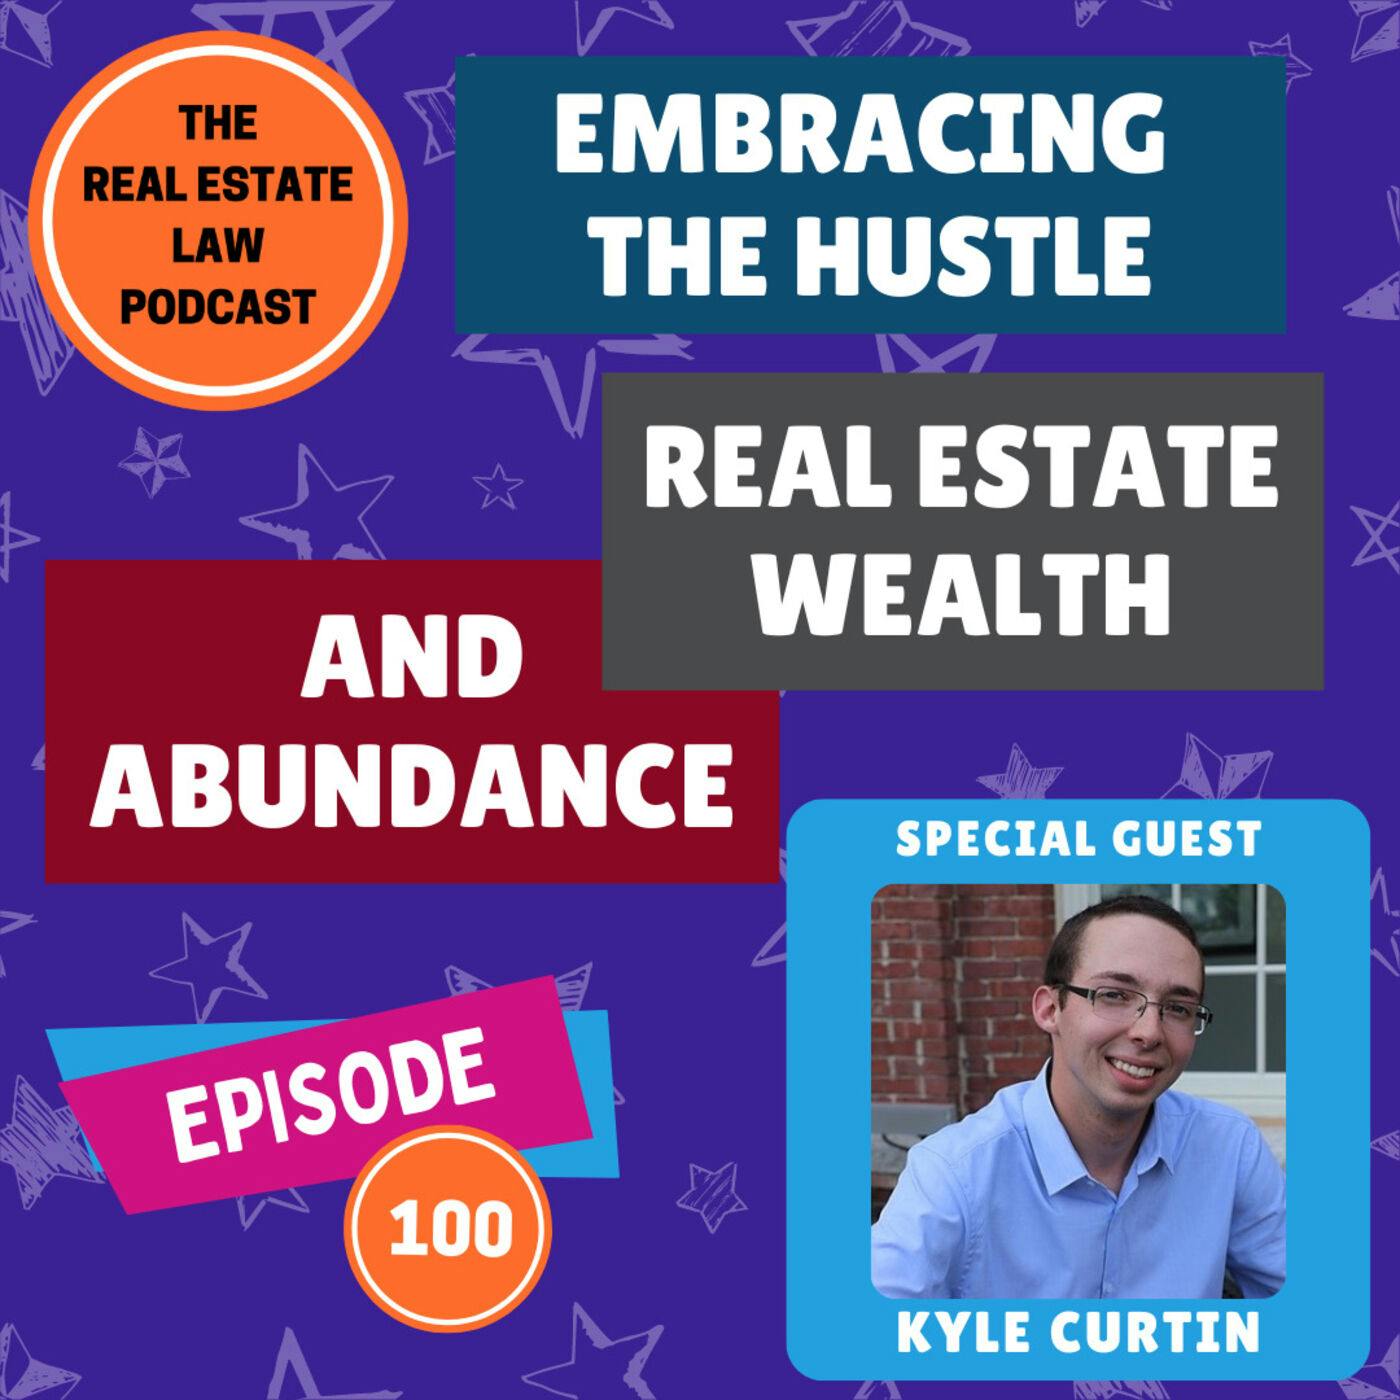 Embracing the Hustle - Real Estate Wealth and Abundance with Master Networker Kyle Curtin